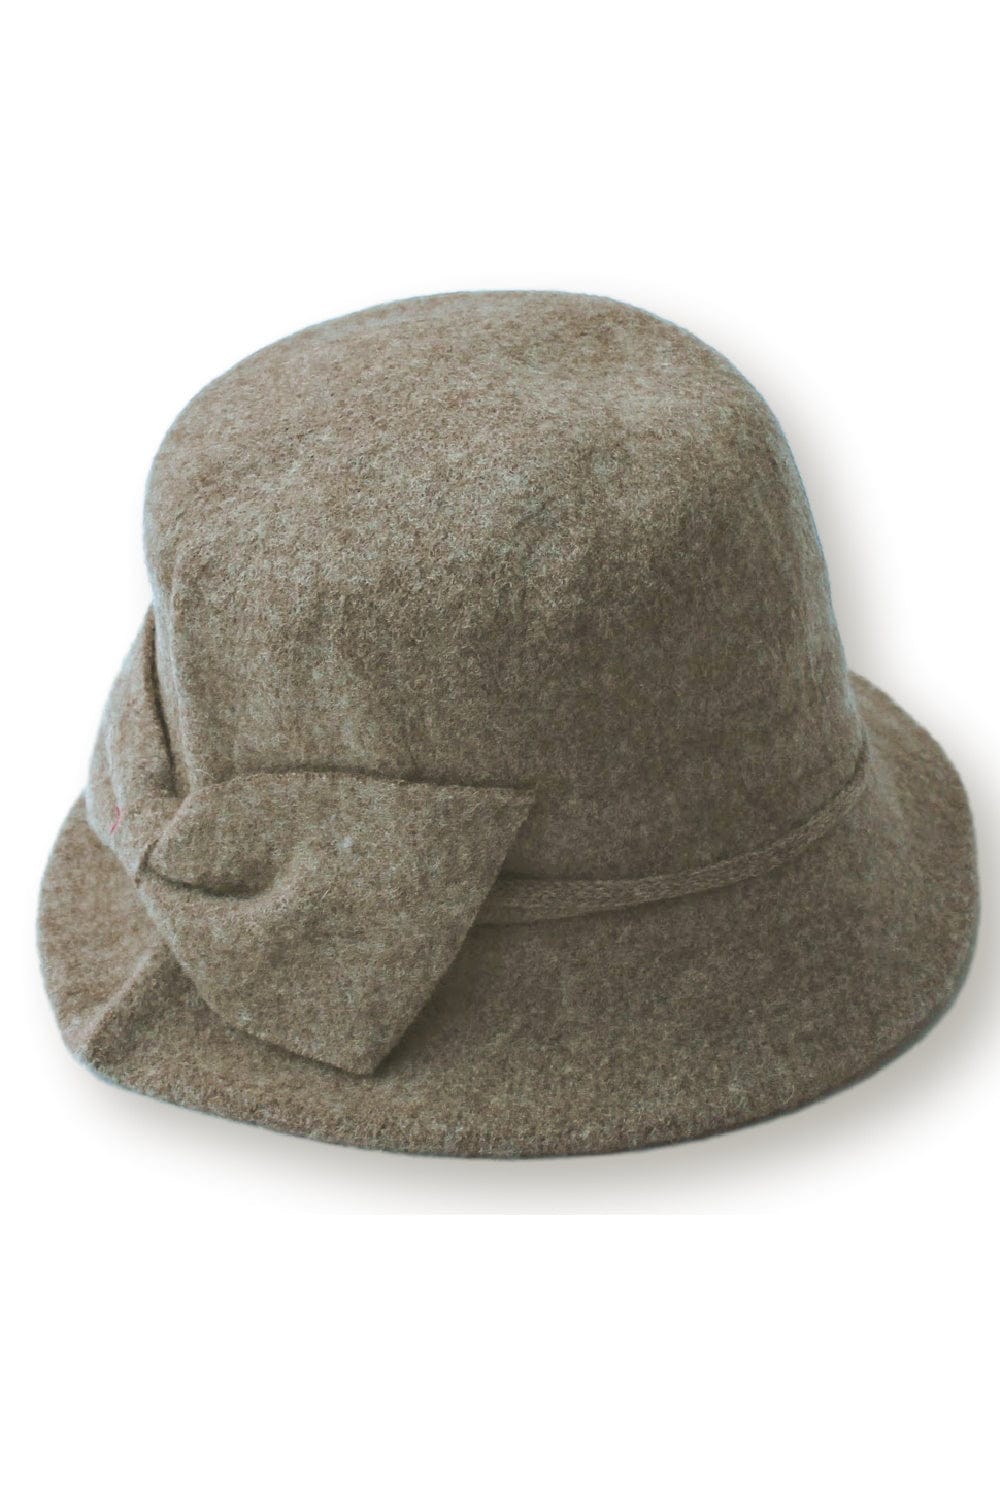 Women's bucket hat with side bow. Hat is merino wool and a beige color.